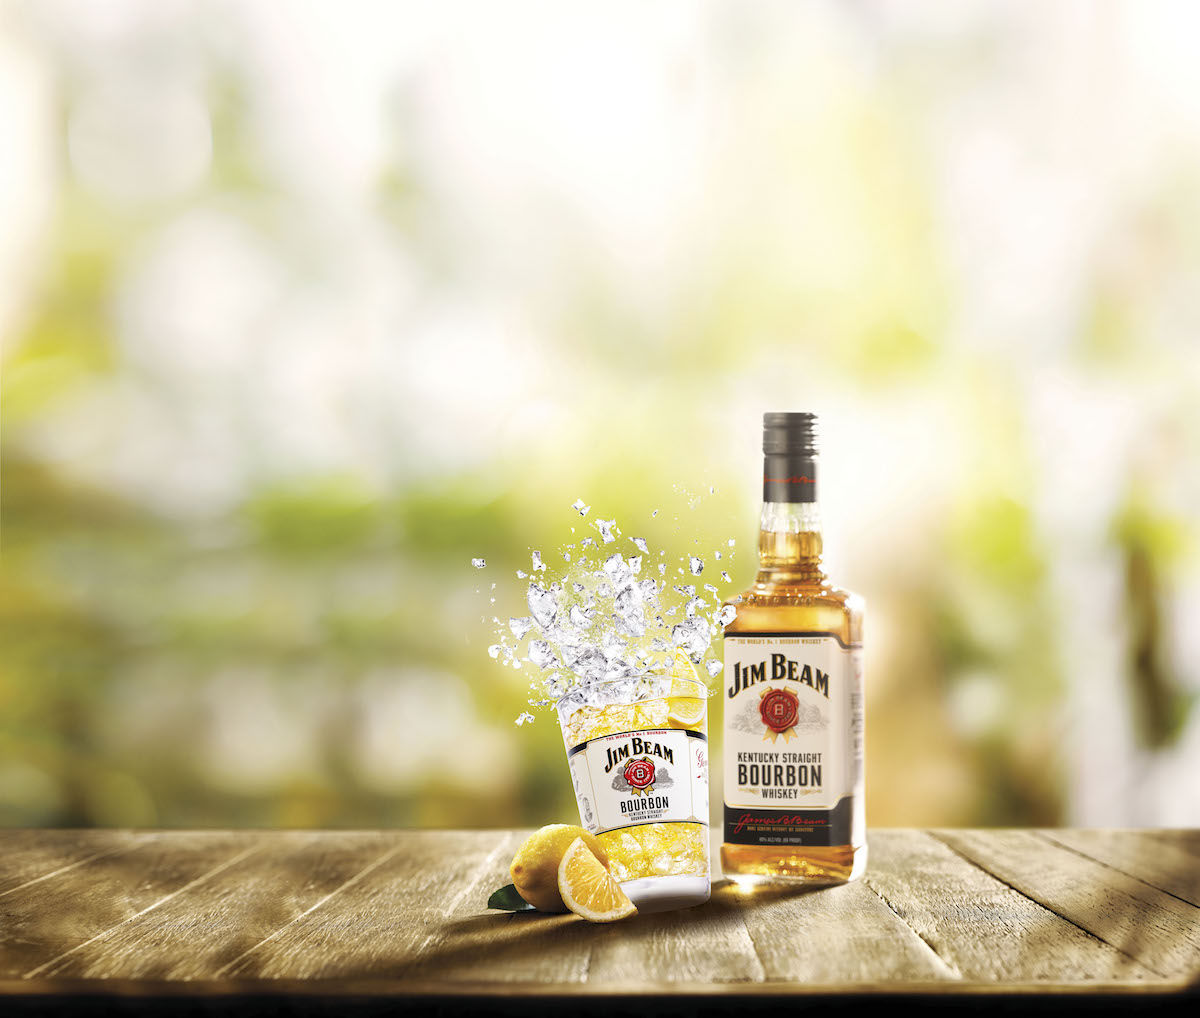 Win tickets to the Armin Only Embrace World Tour with Jim Beam